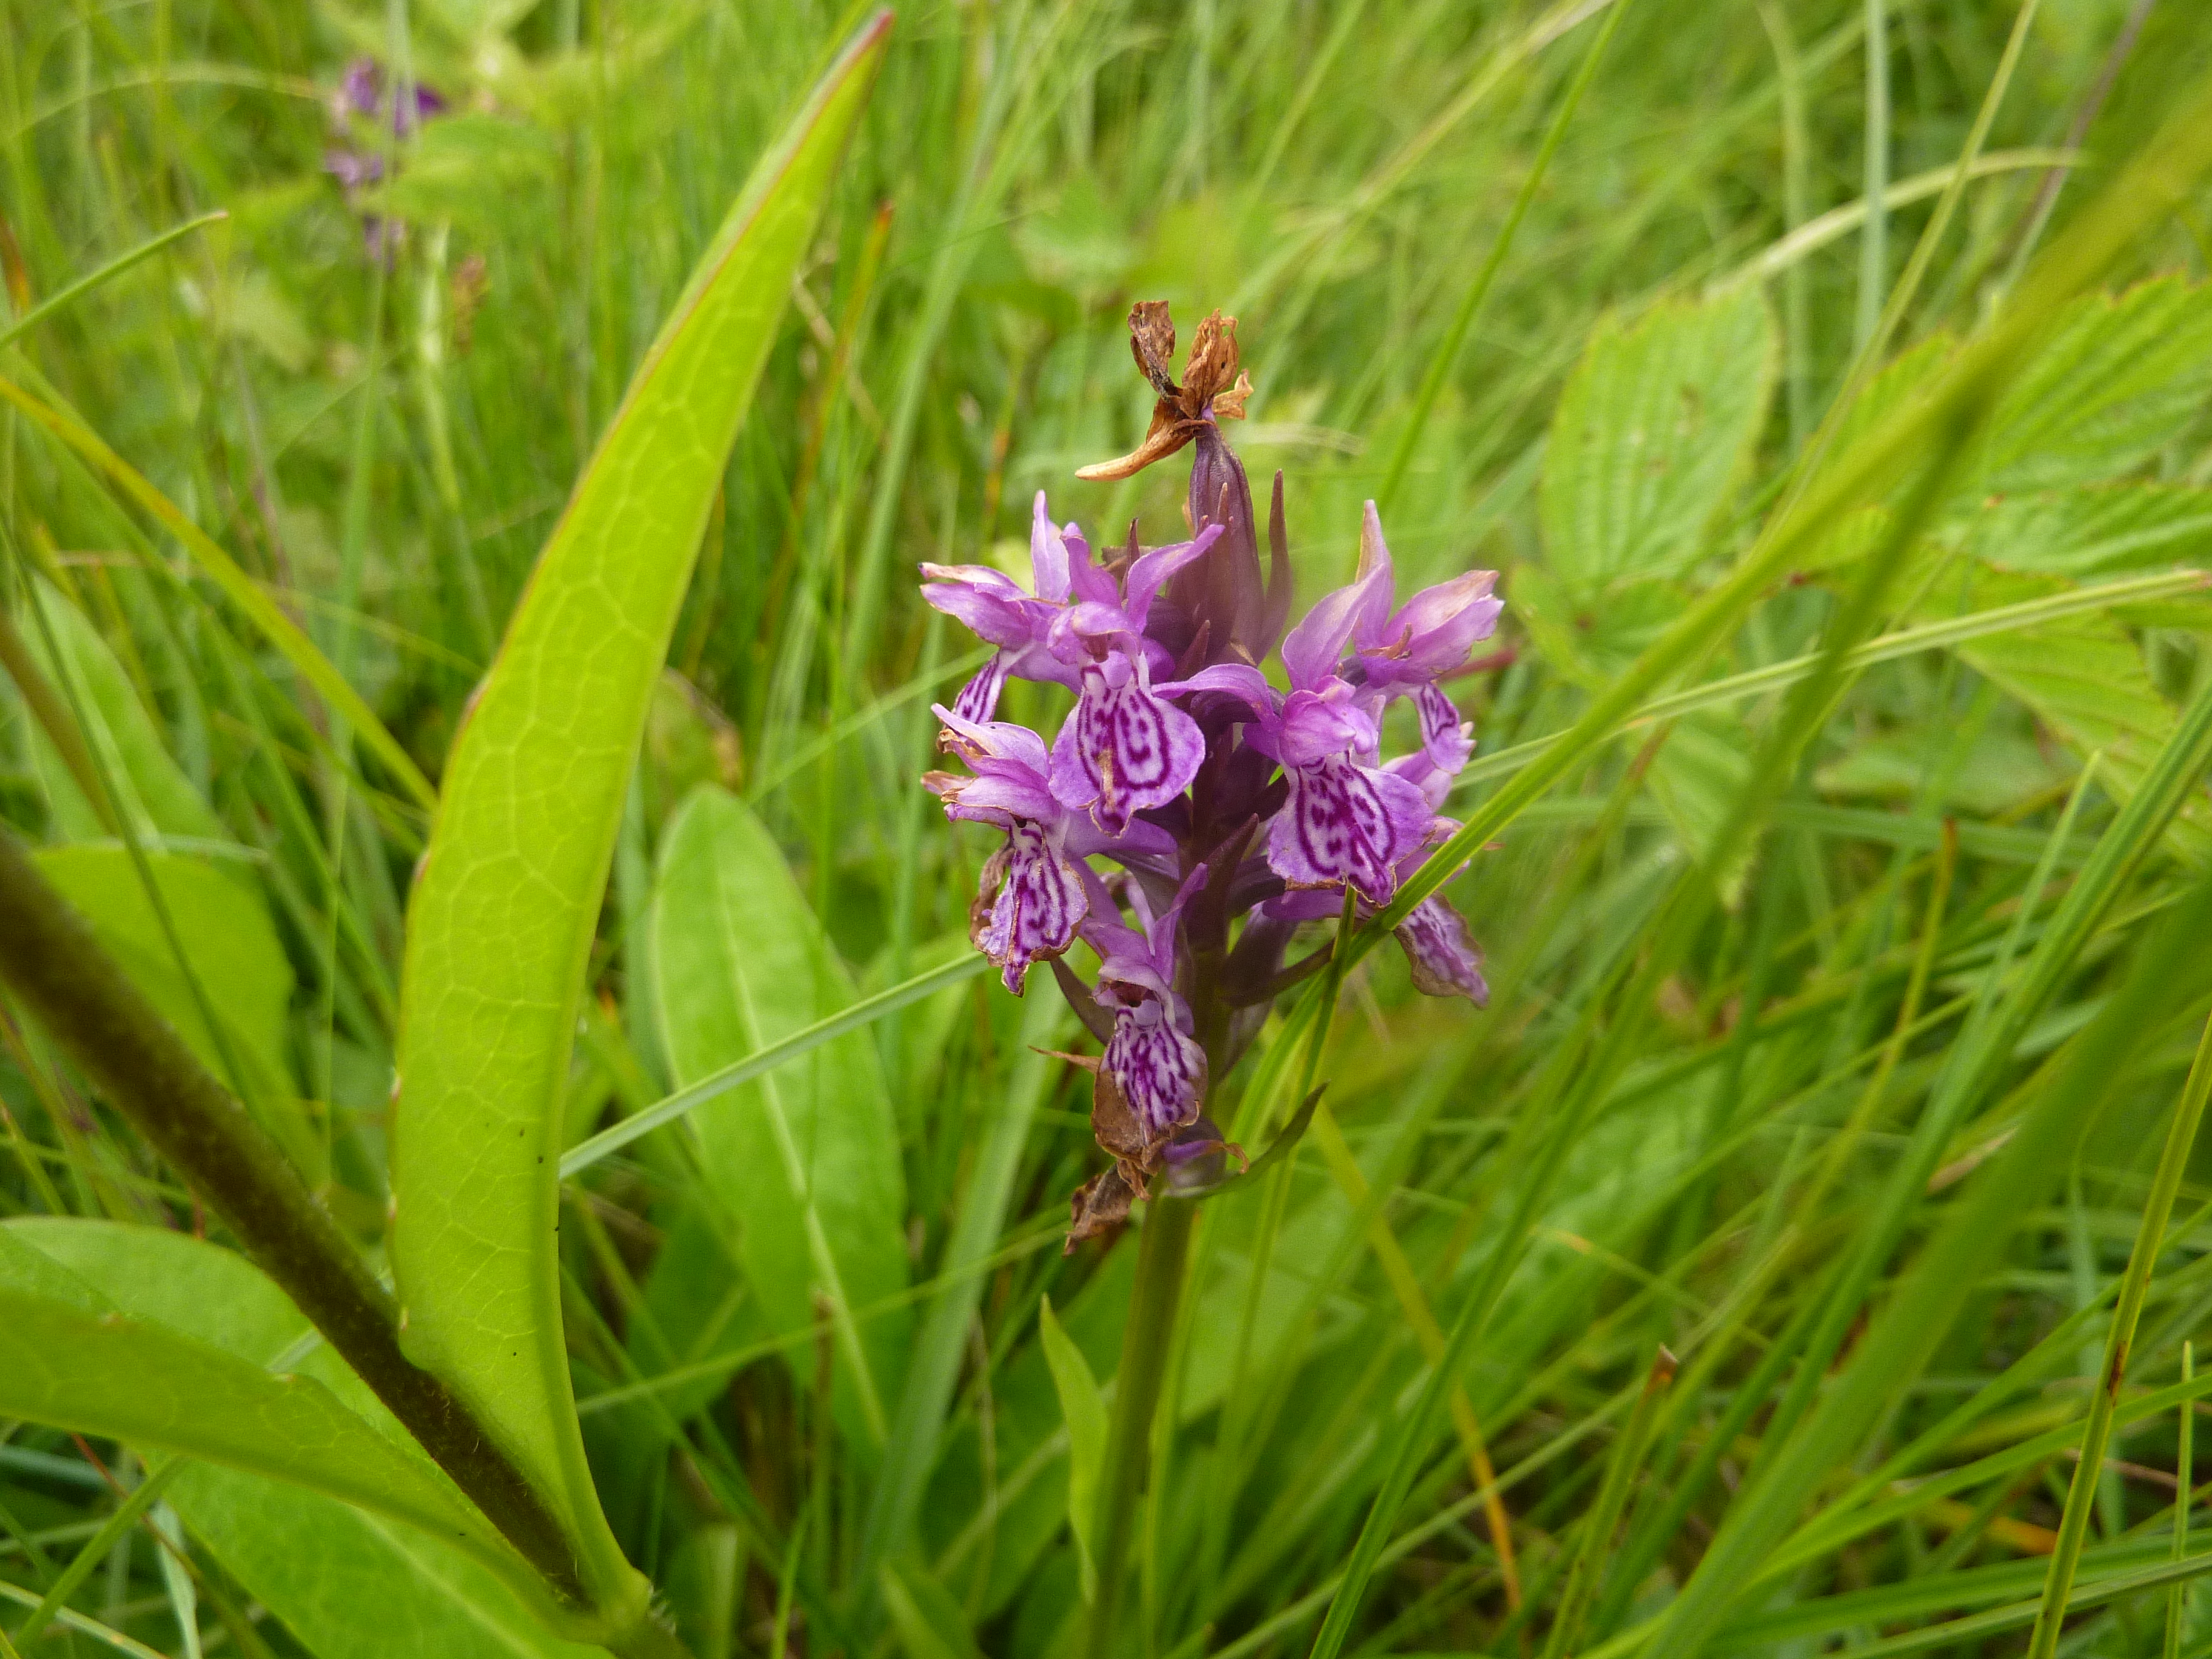 Early Marsh Orchid (possibly a hybrid), Malham, 12th July 2022